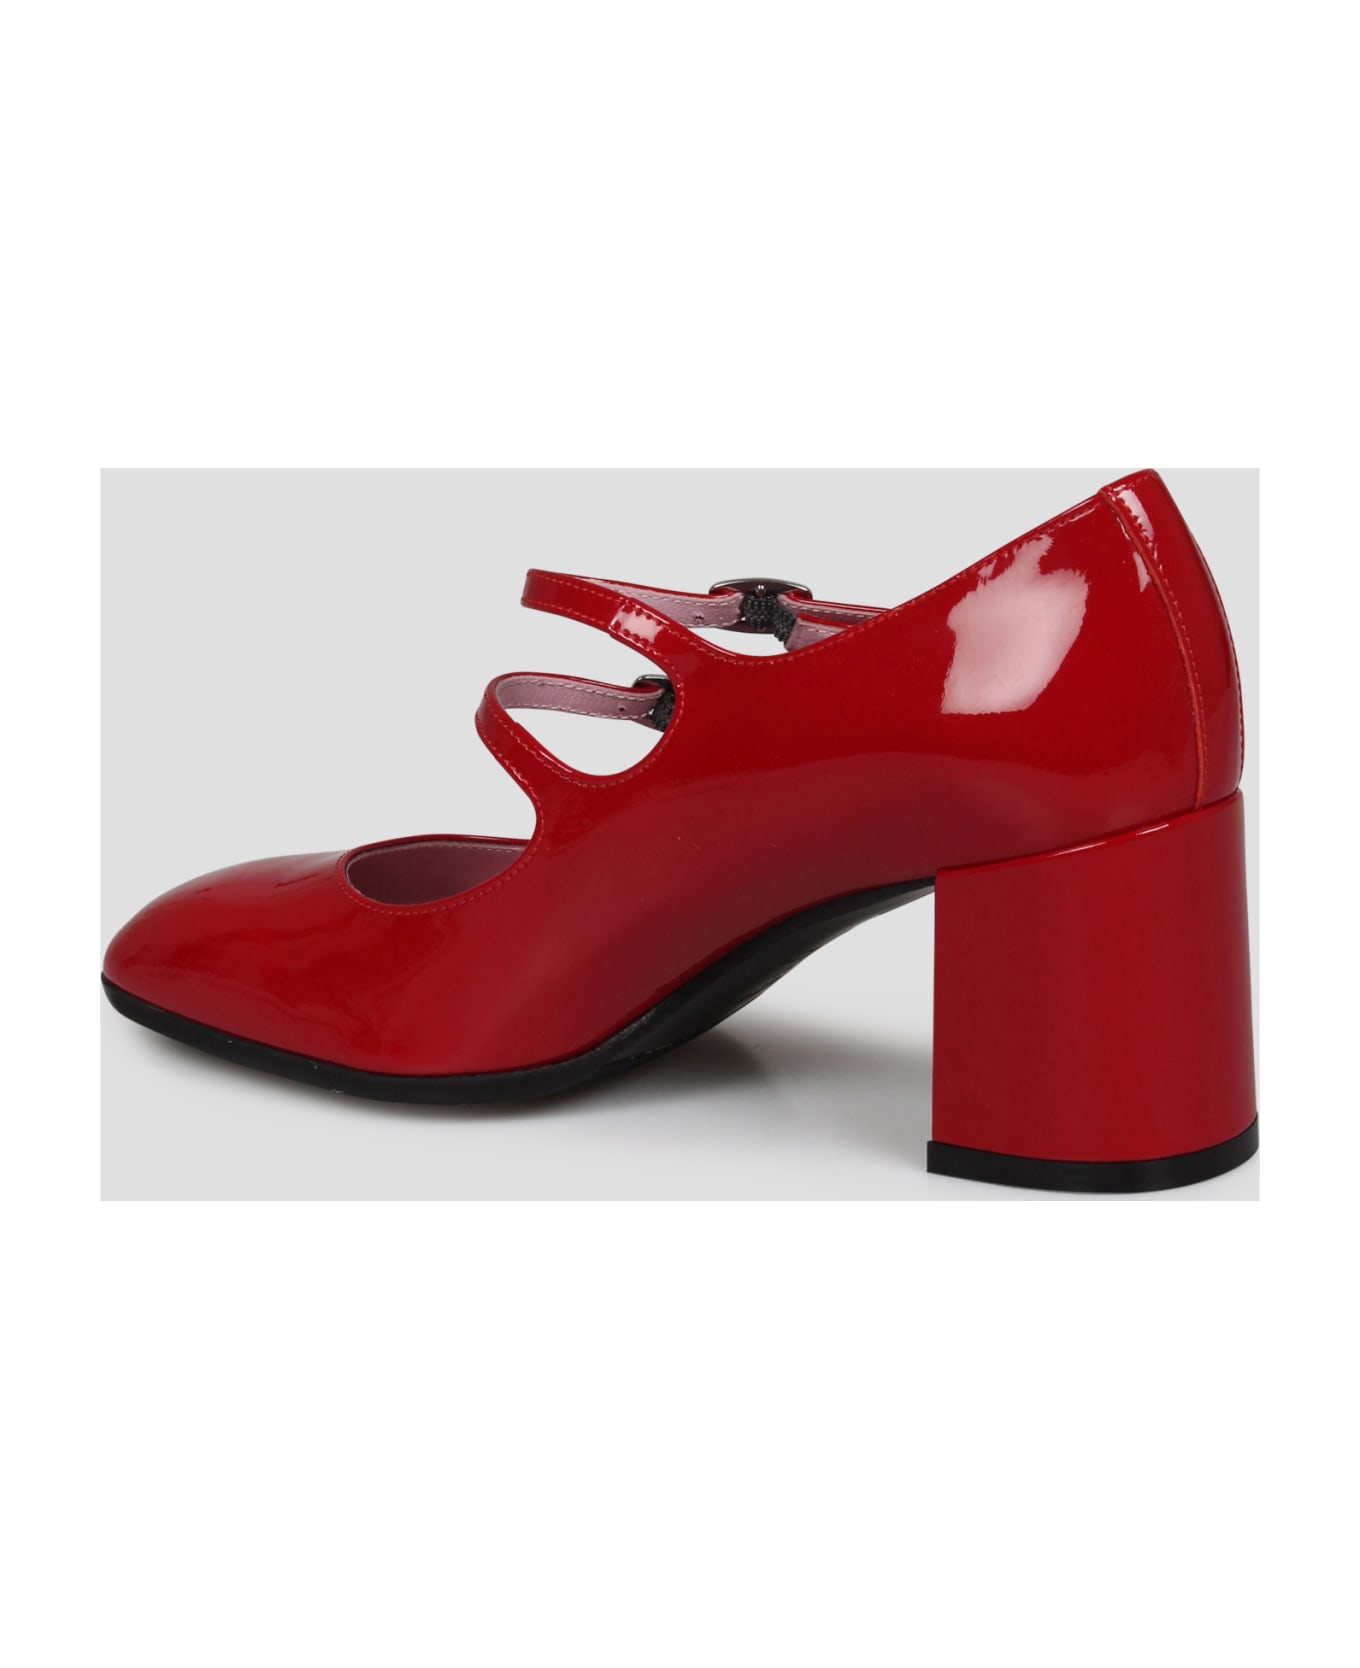 Carel Alice Mary Jane Pumps - Red